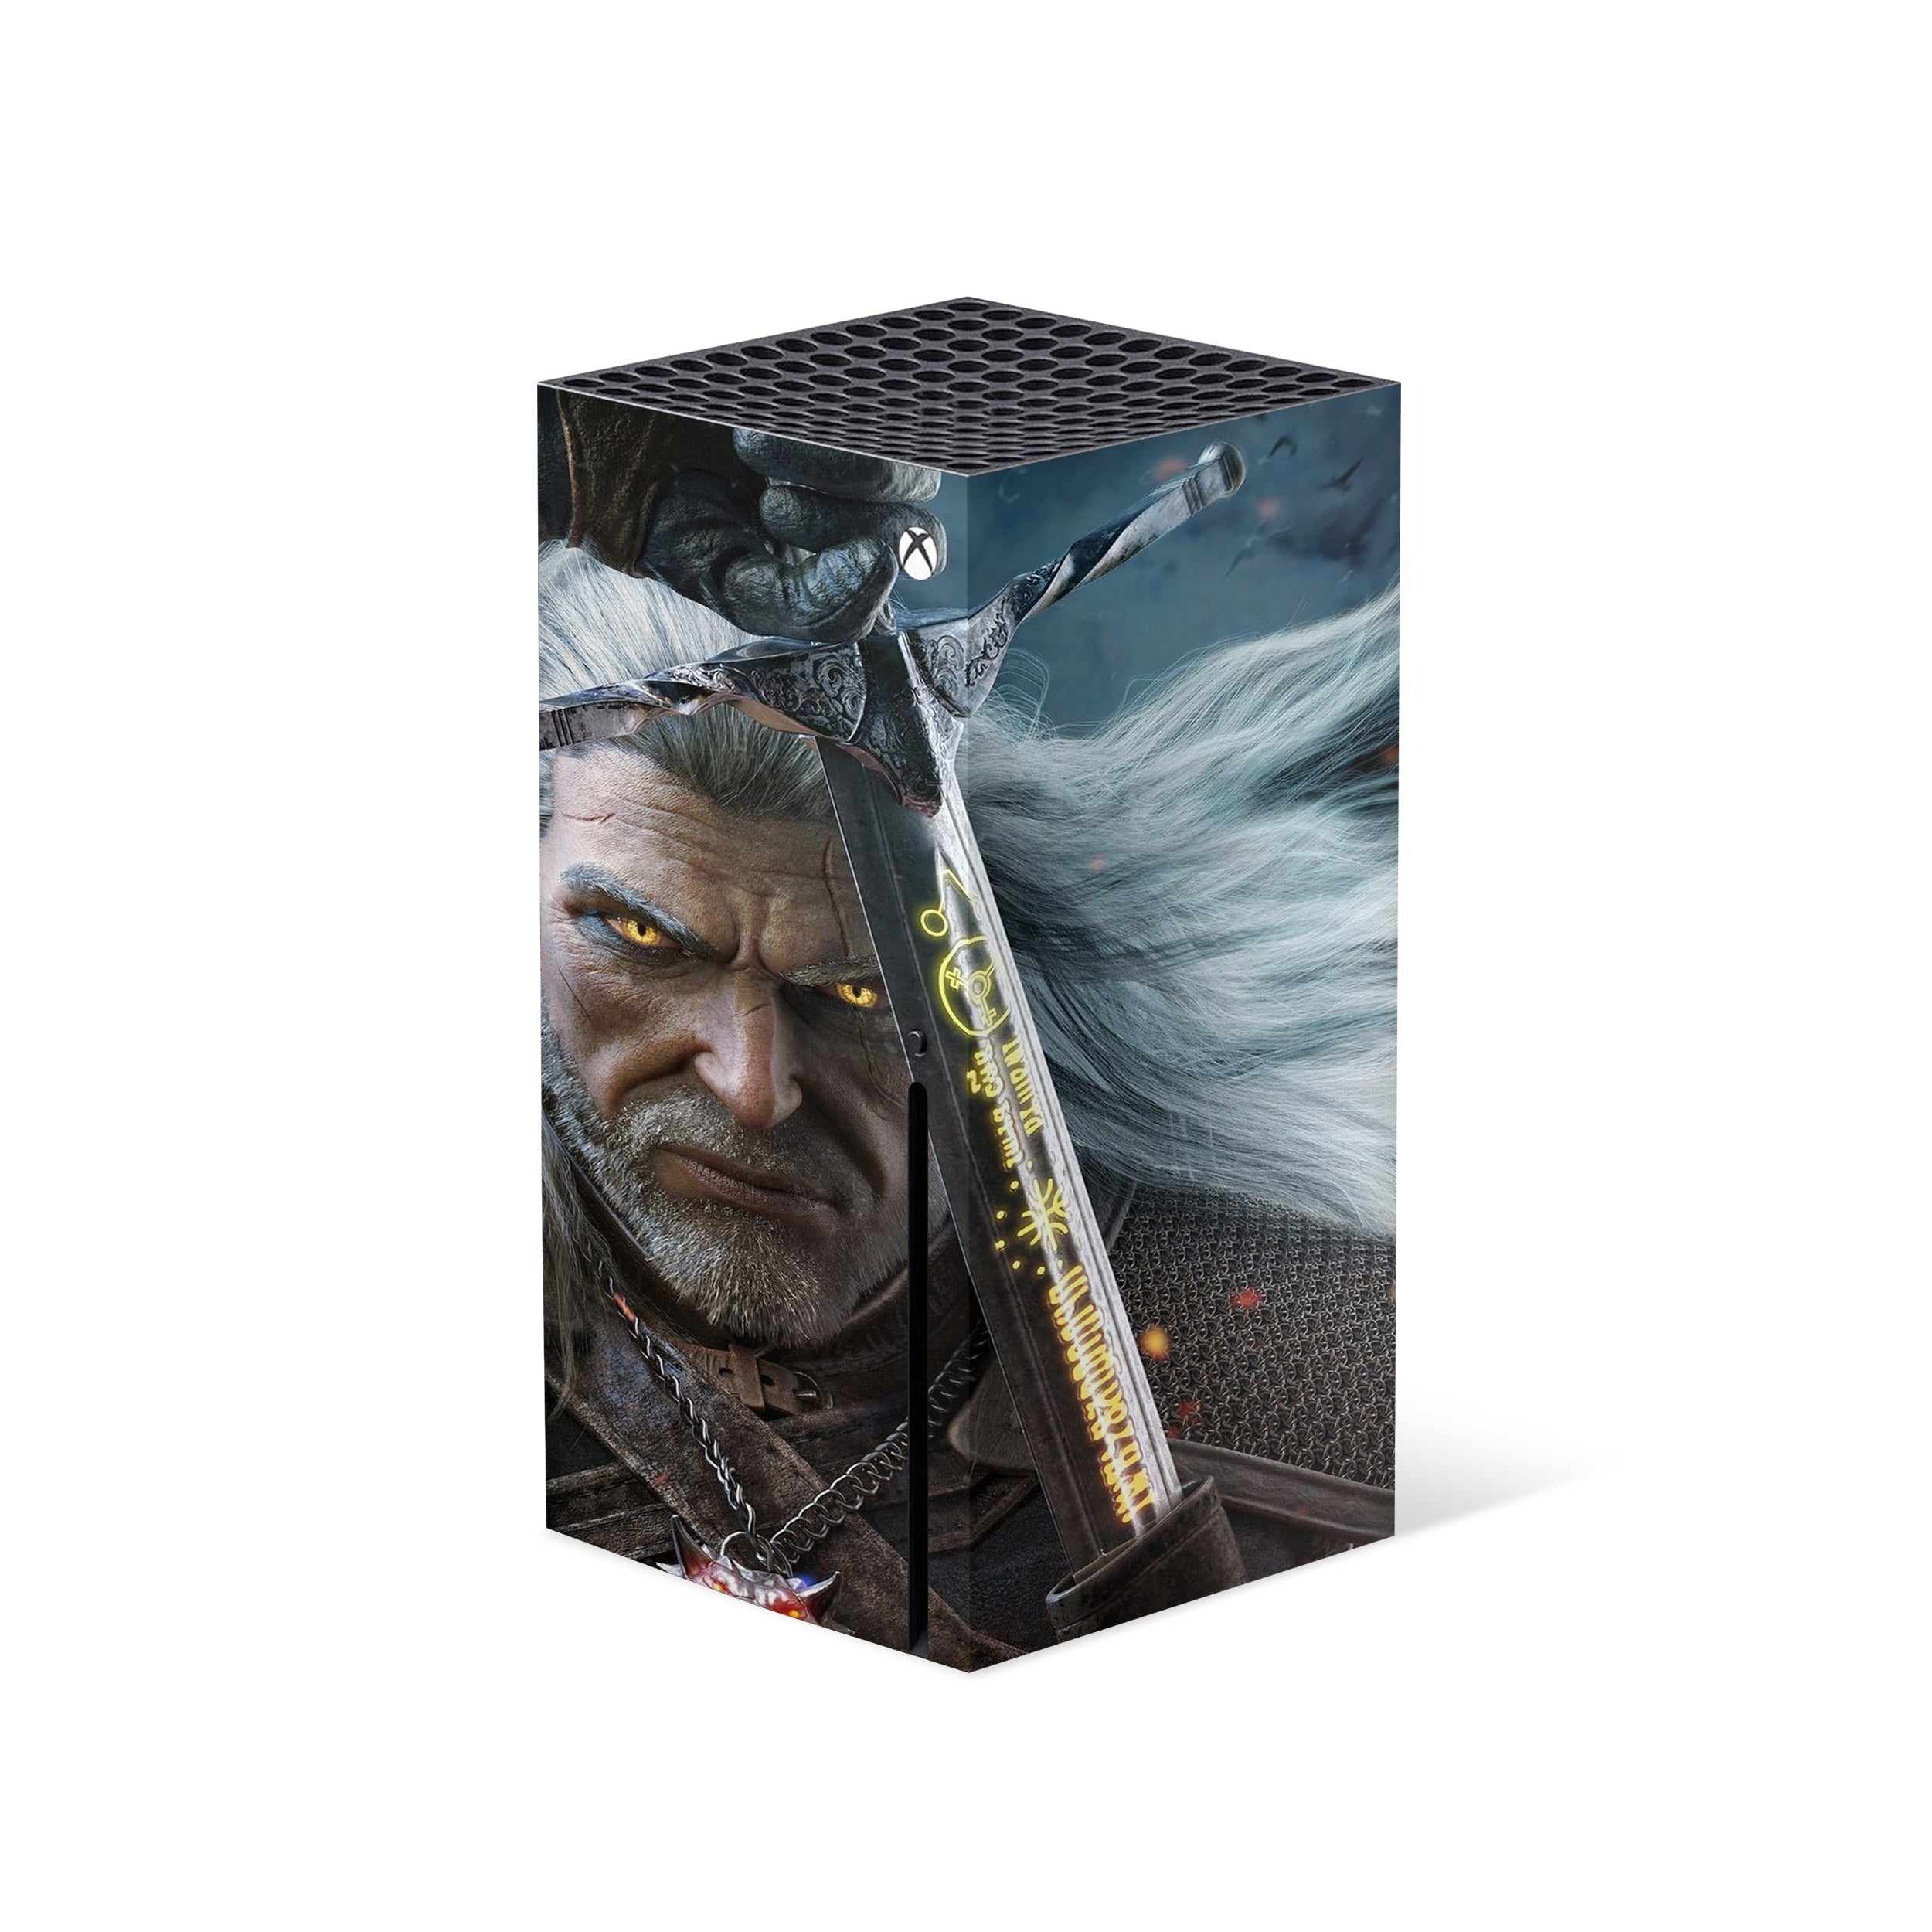 A video game skin featuring a The Witcher 3 design for the Xbox Series X.